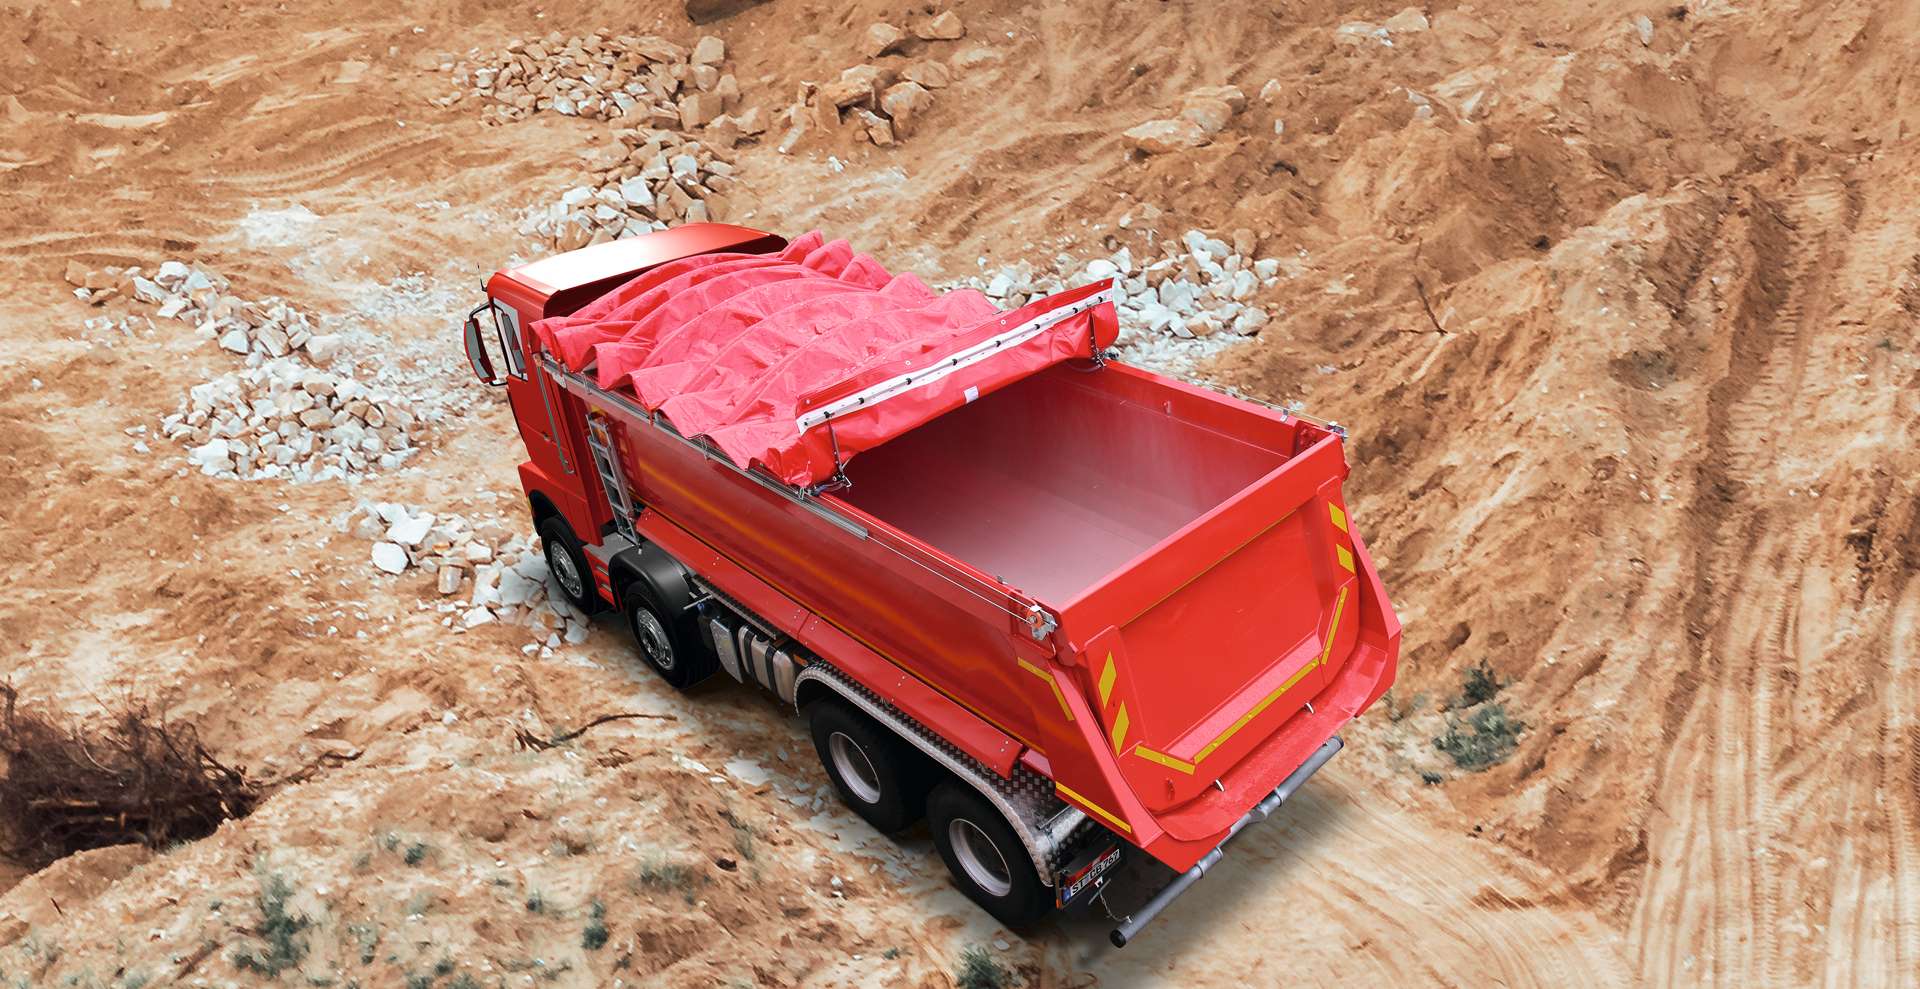 Fast loading and unloading with the electric sliding tarpaulin on the M.KI truck tipper body